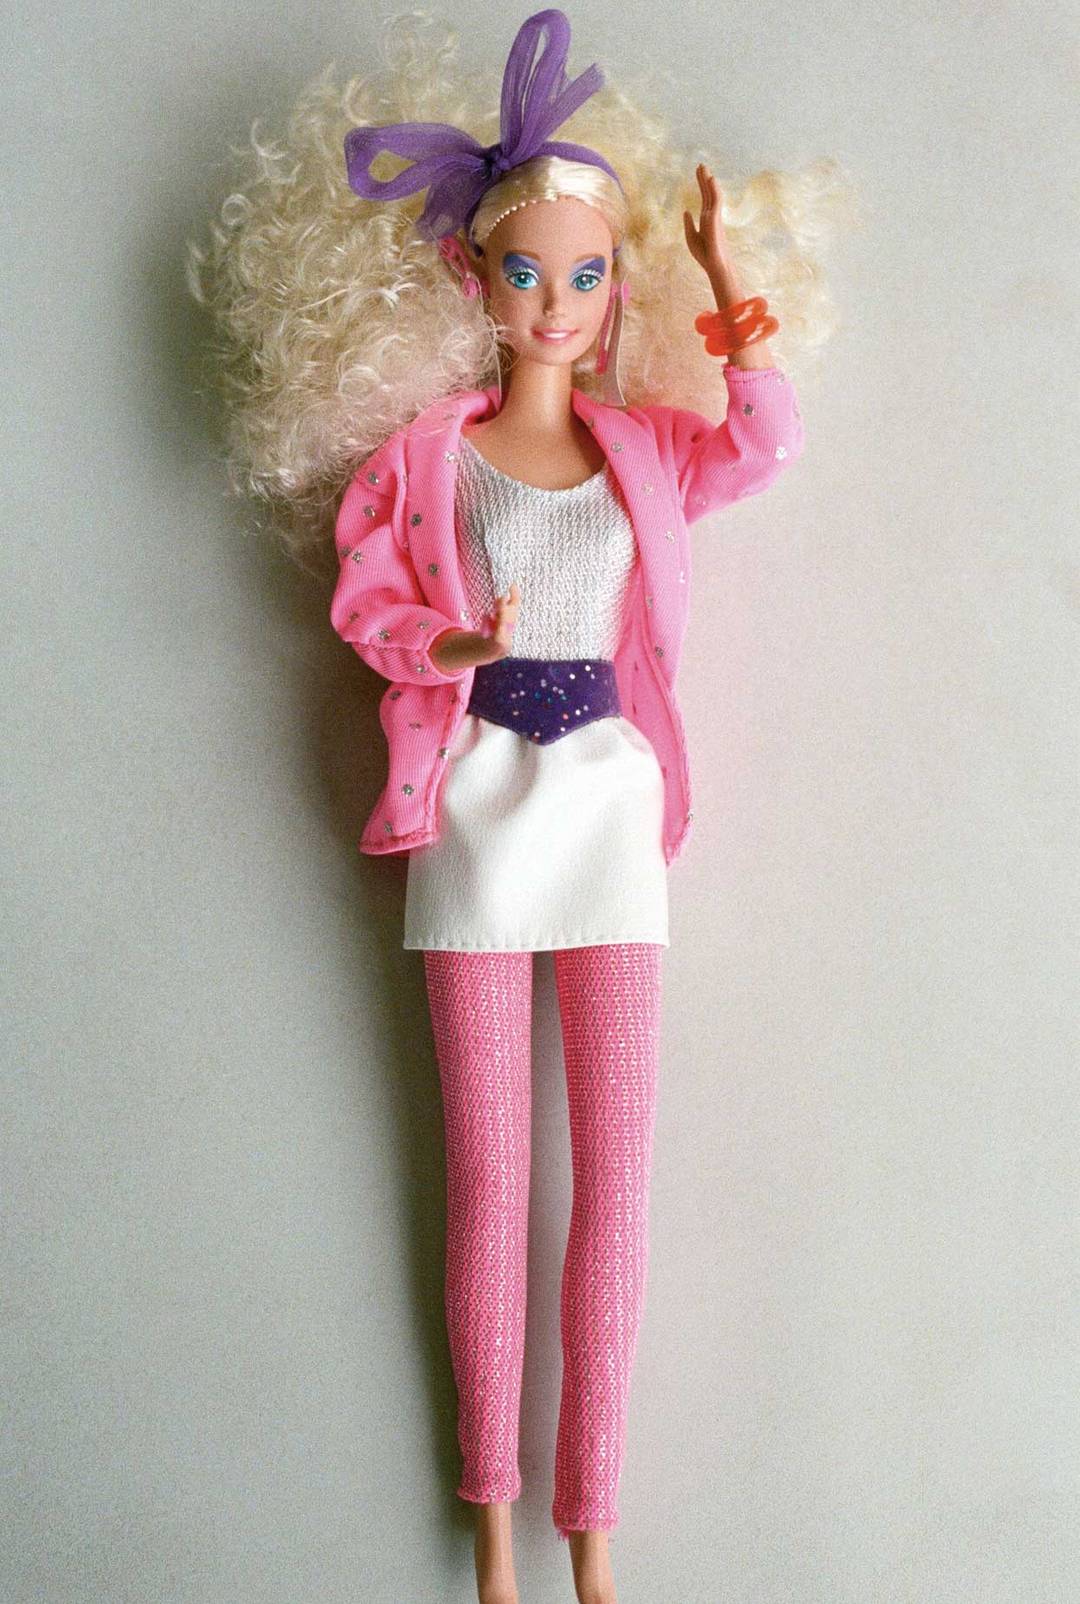 How Ruth Handler dreamed up the Barbie doll 